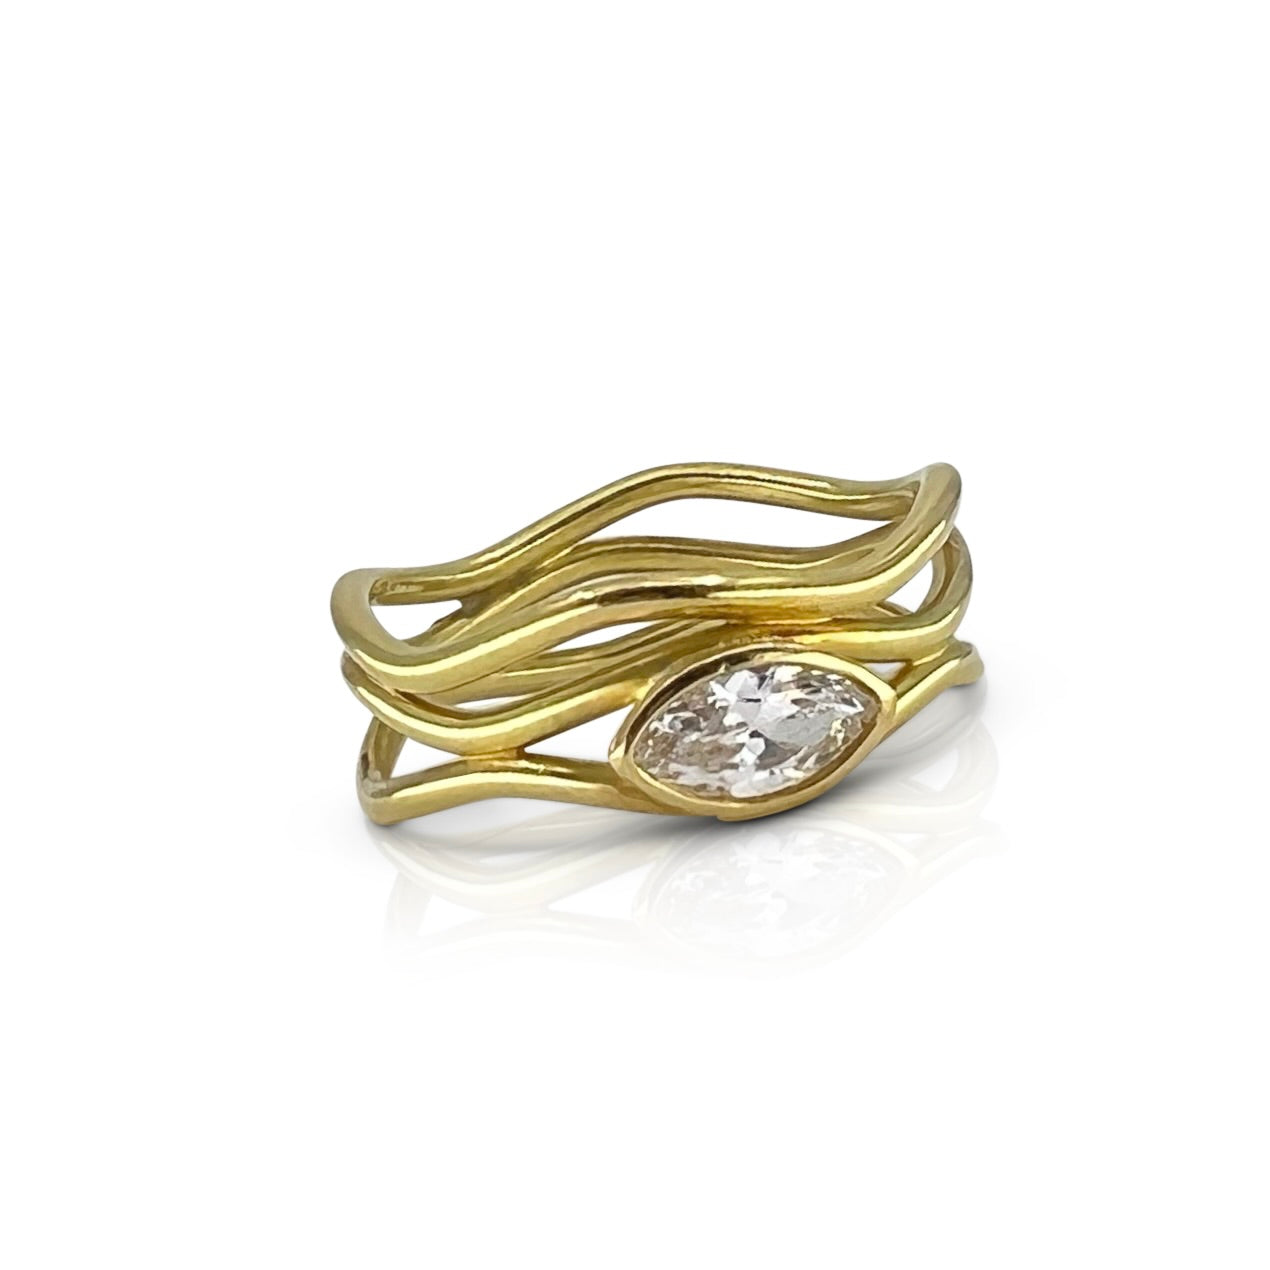 Serpentine ring with marquis diamond in 18K gold